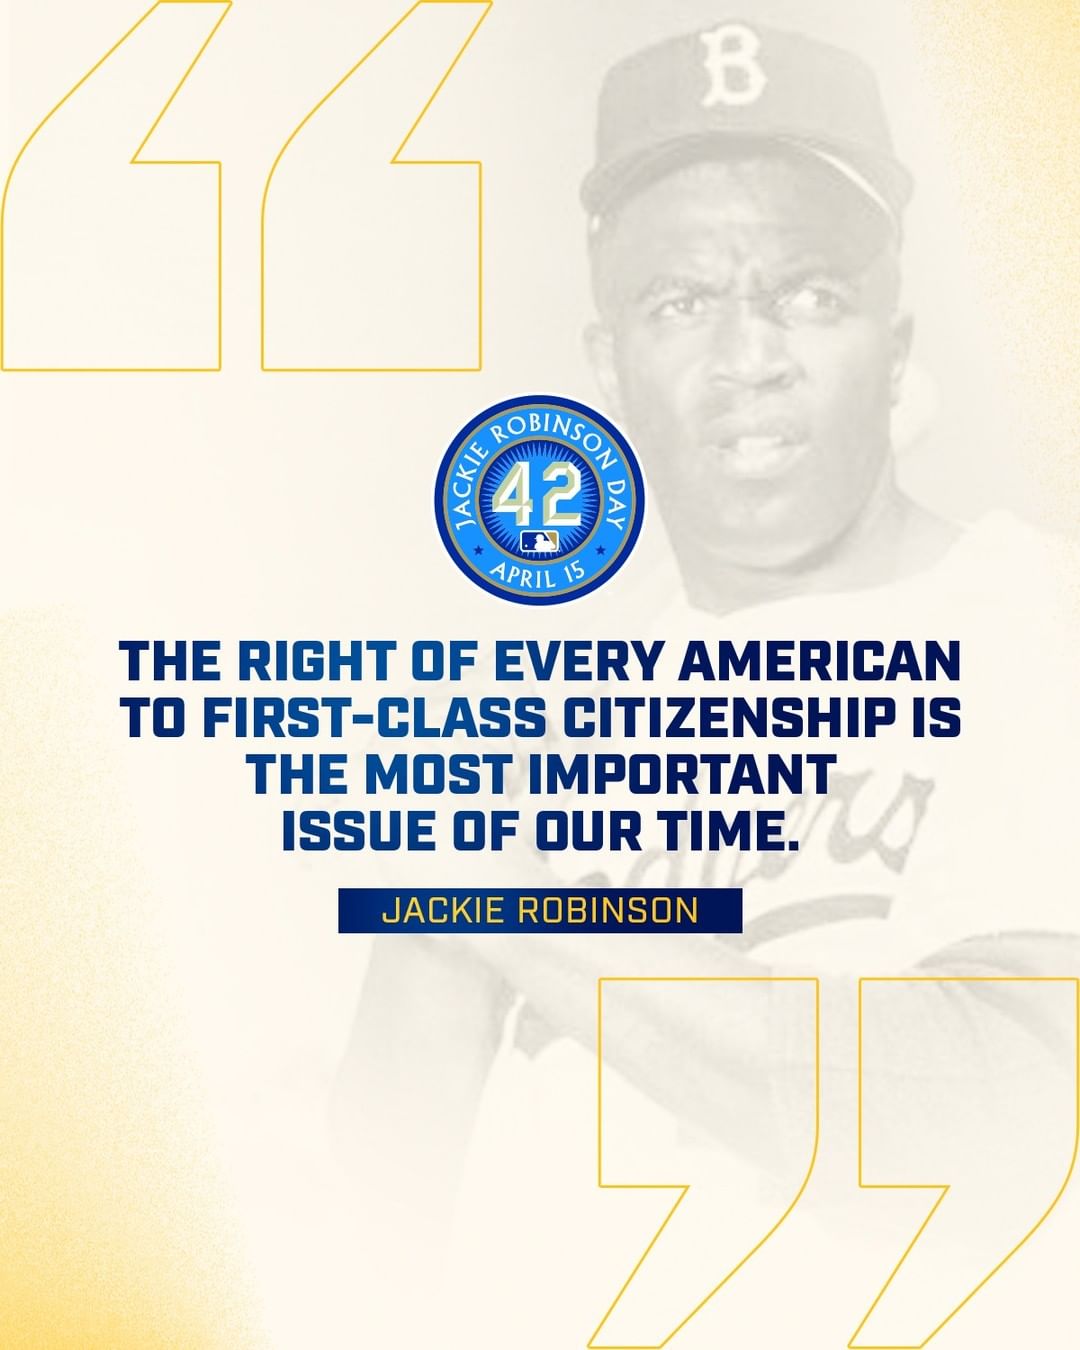 Today we celebrate Jackie Robinson’s legacy as a baseball giant who changed the ...